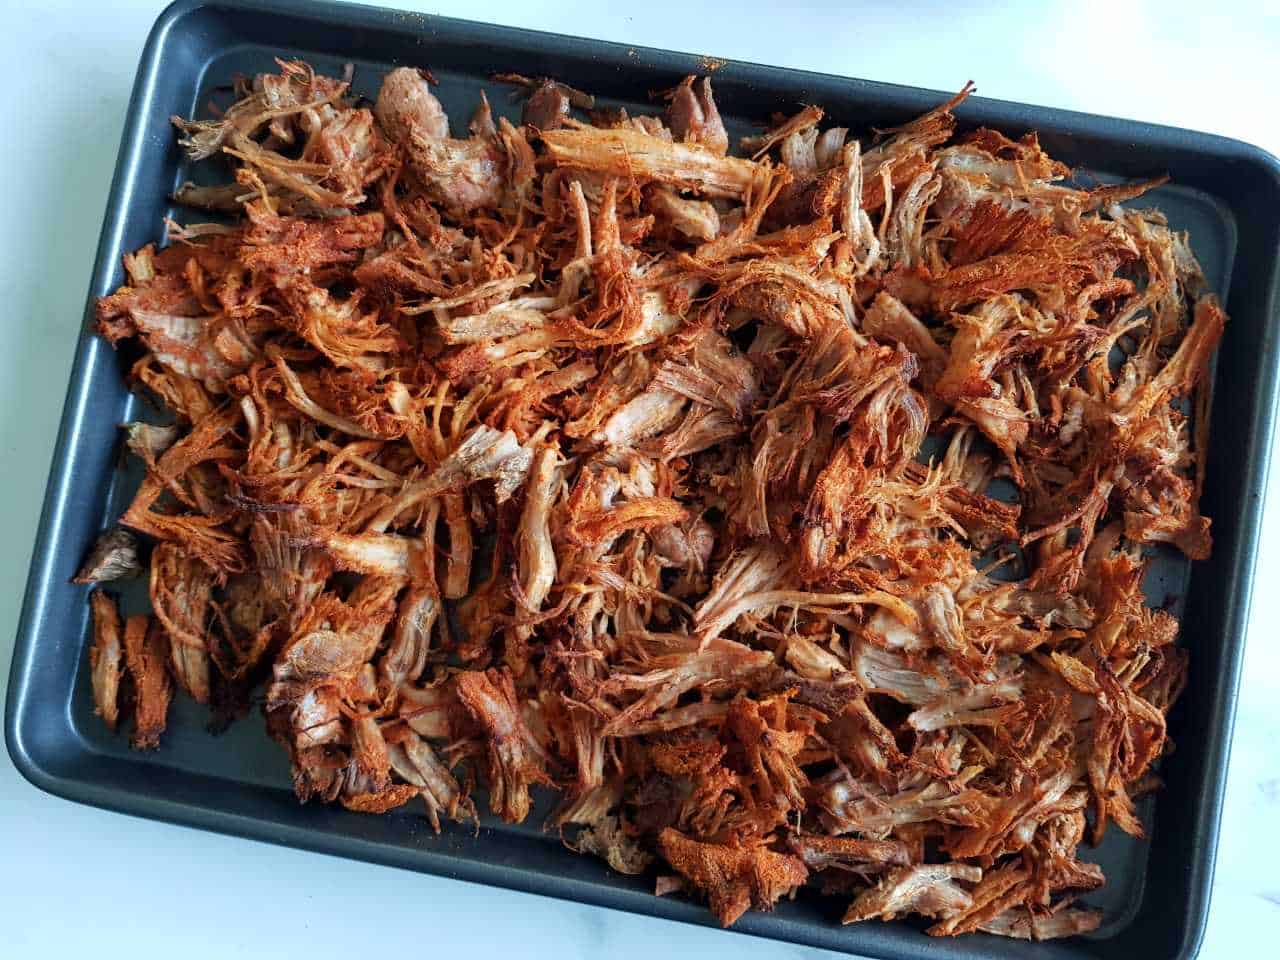 Taco pulled pork on a baking tray.